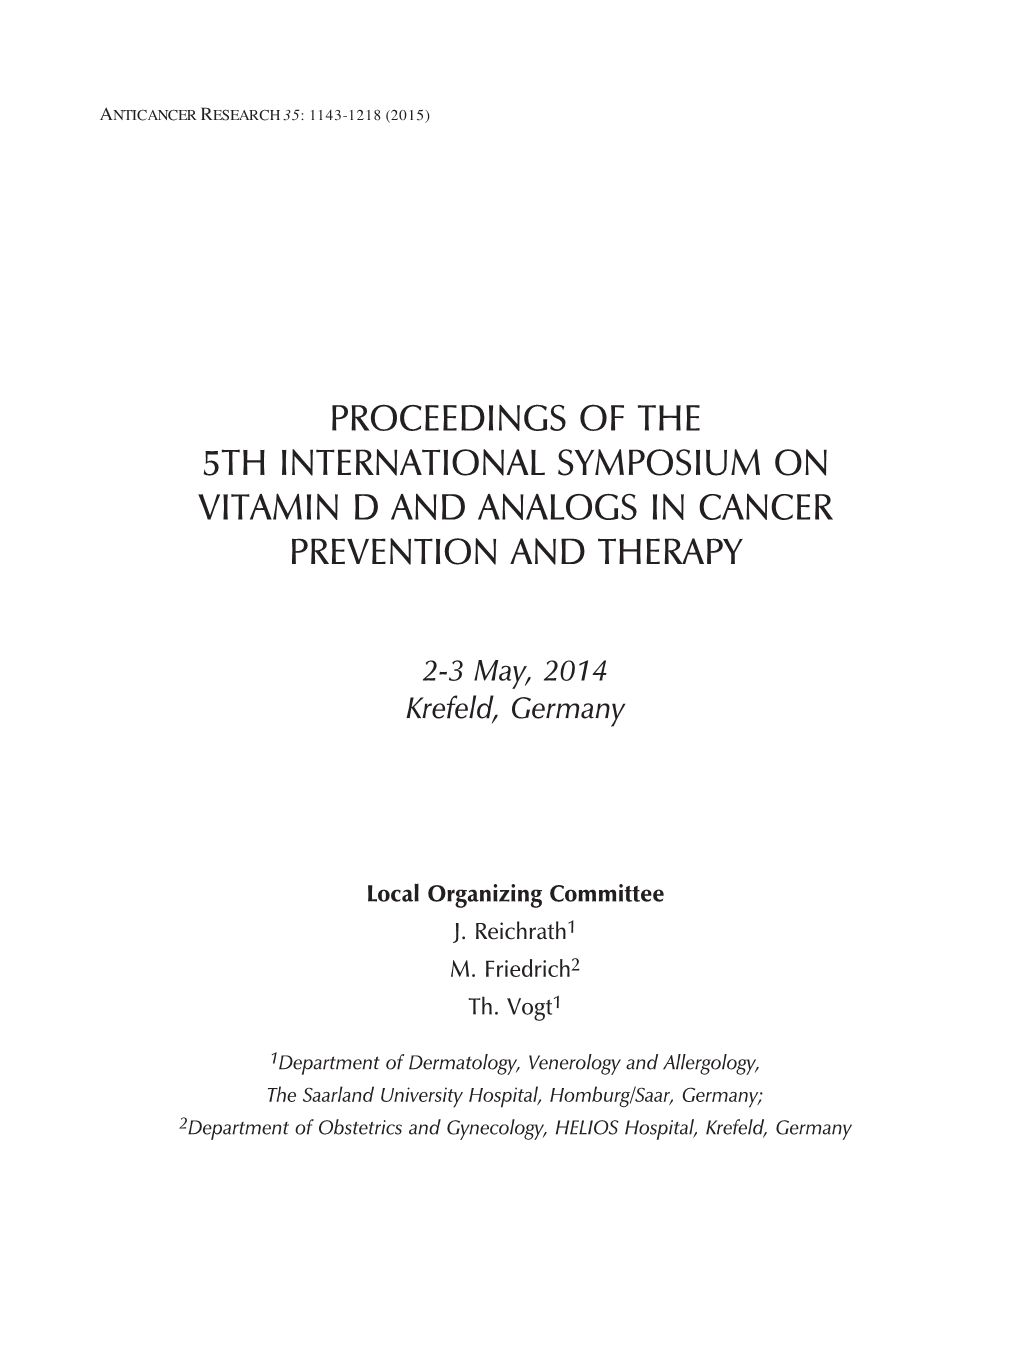 Proceedings of the 5Th International Symposium on Vitamin D and Analogs in Cancer Prevention and Therapy